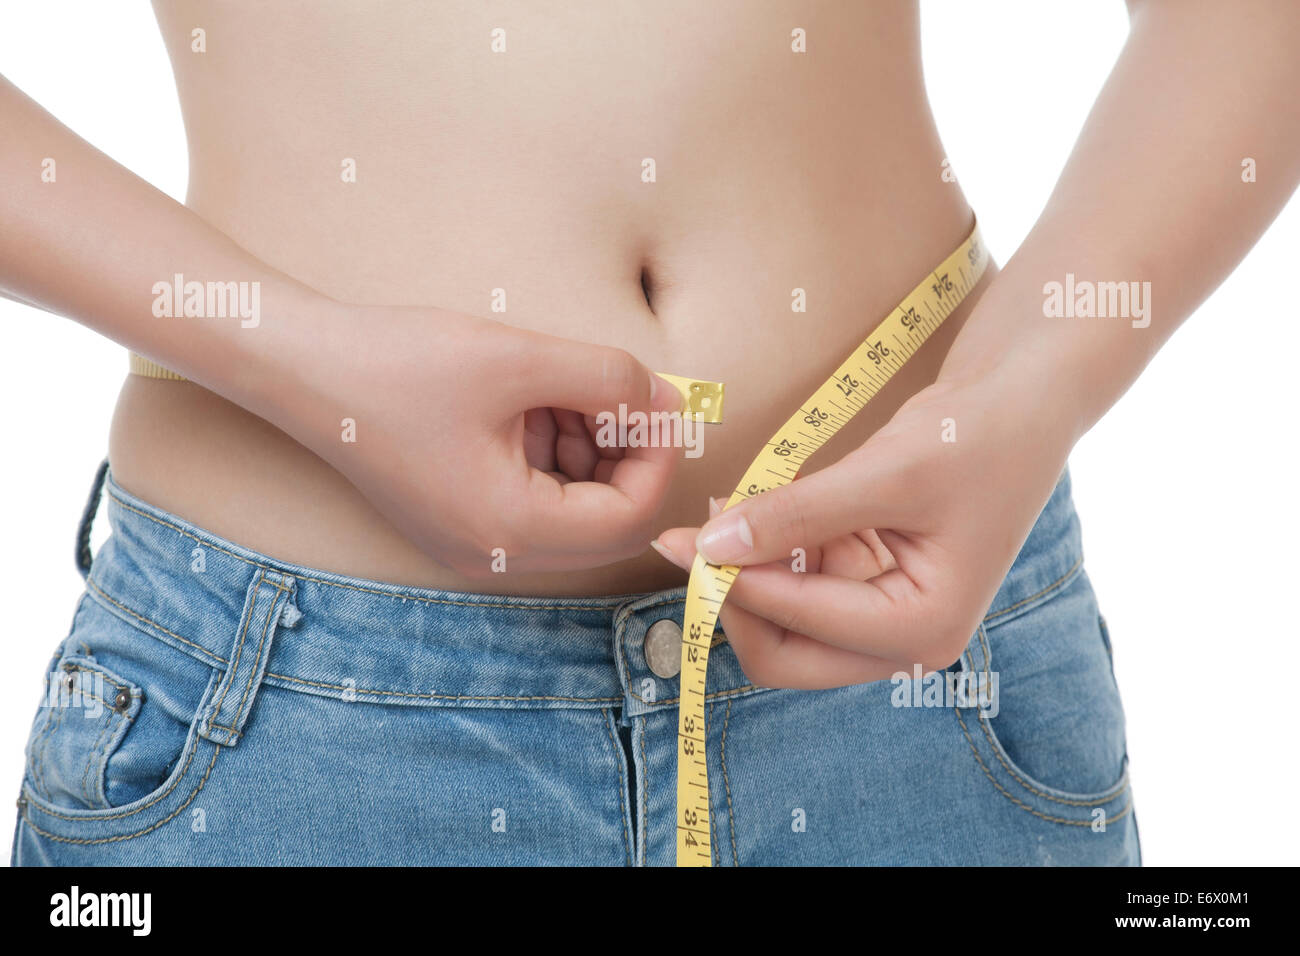 Woman Measuring Her Waist With A Yellow Measuring Tape, Isolated